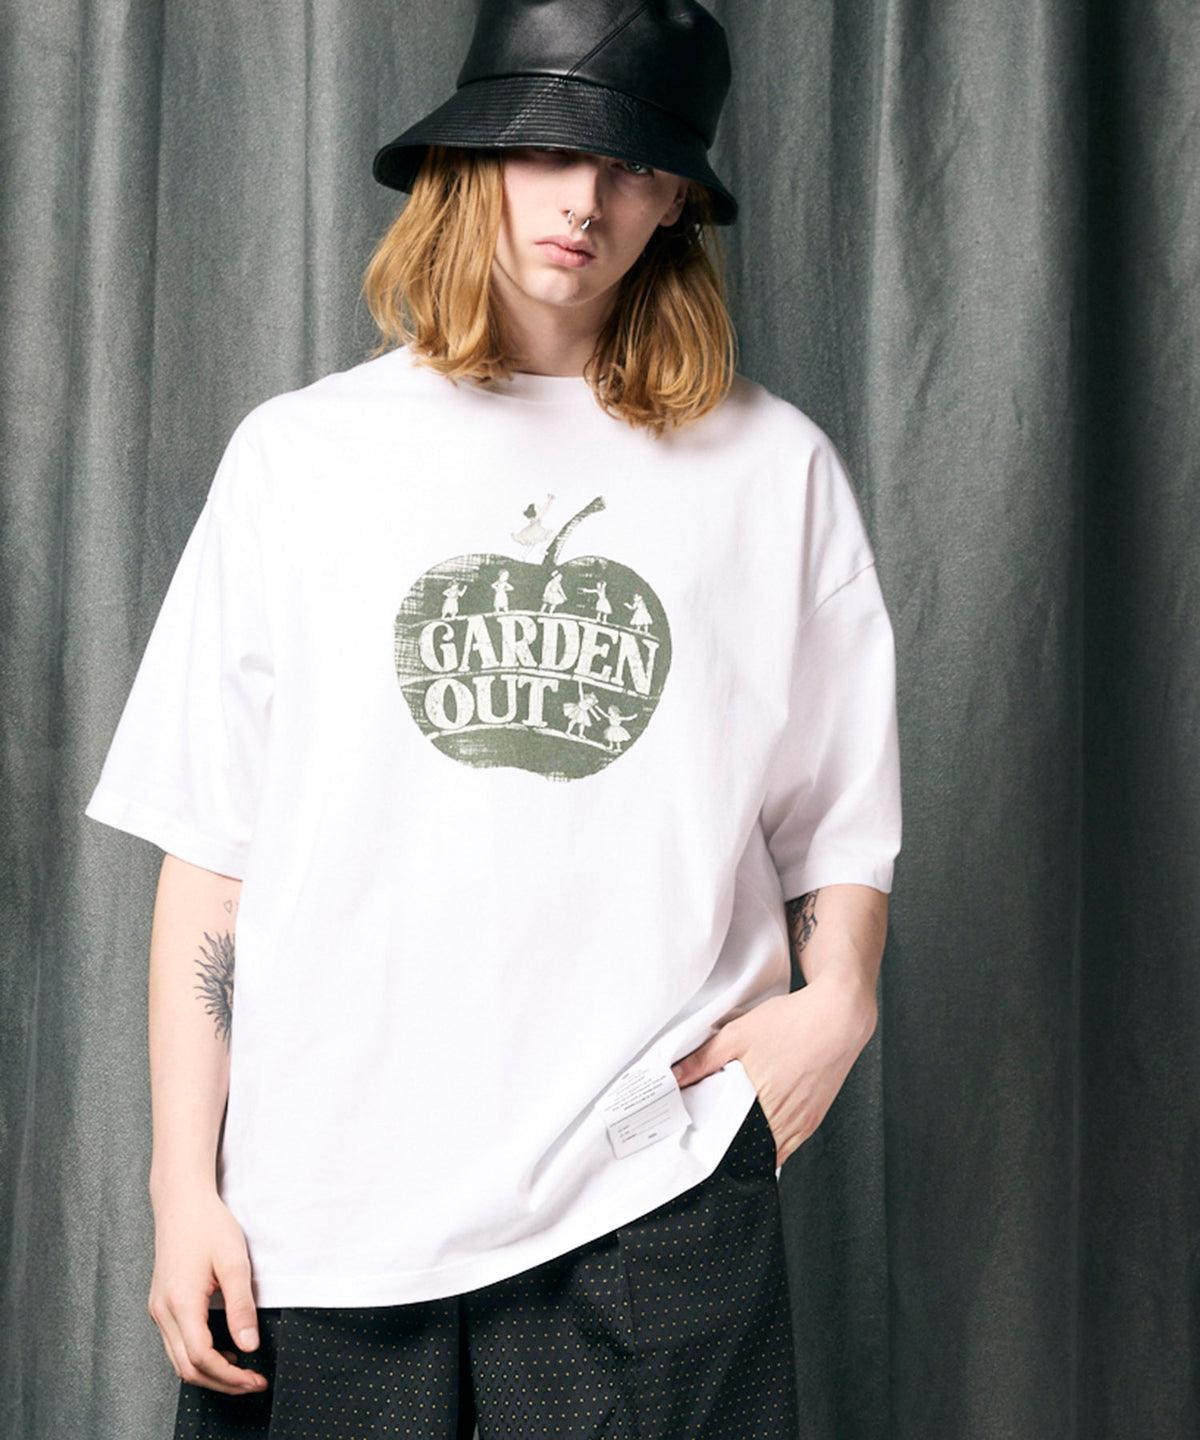 【WEB LIMITED】Apple Graphic Prime-Over Crew Neck T-shirt